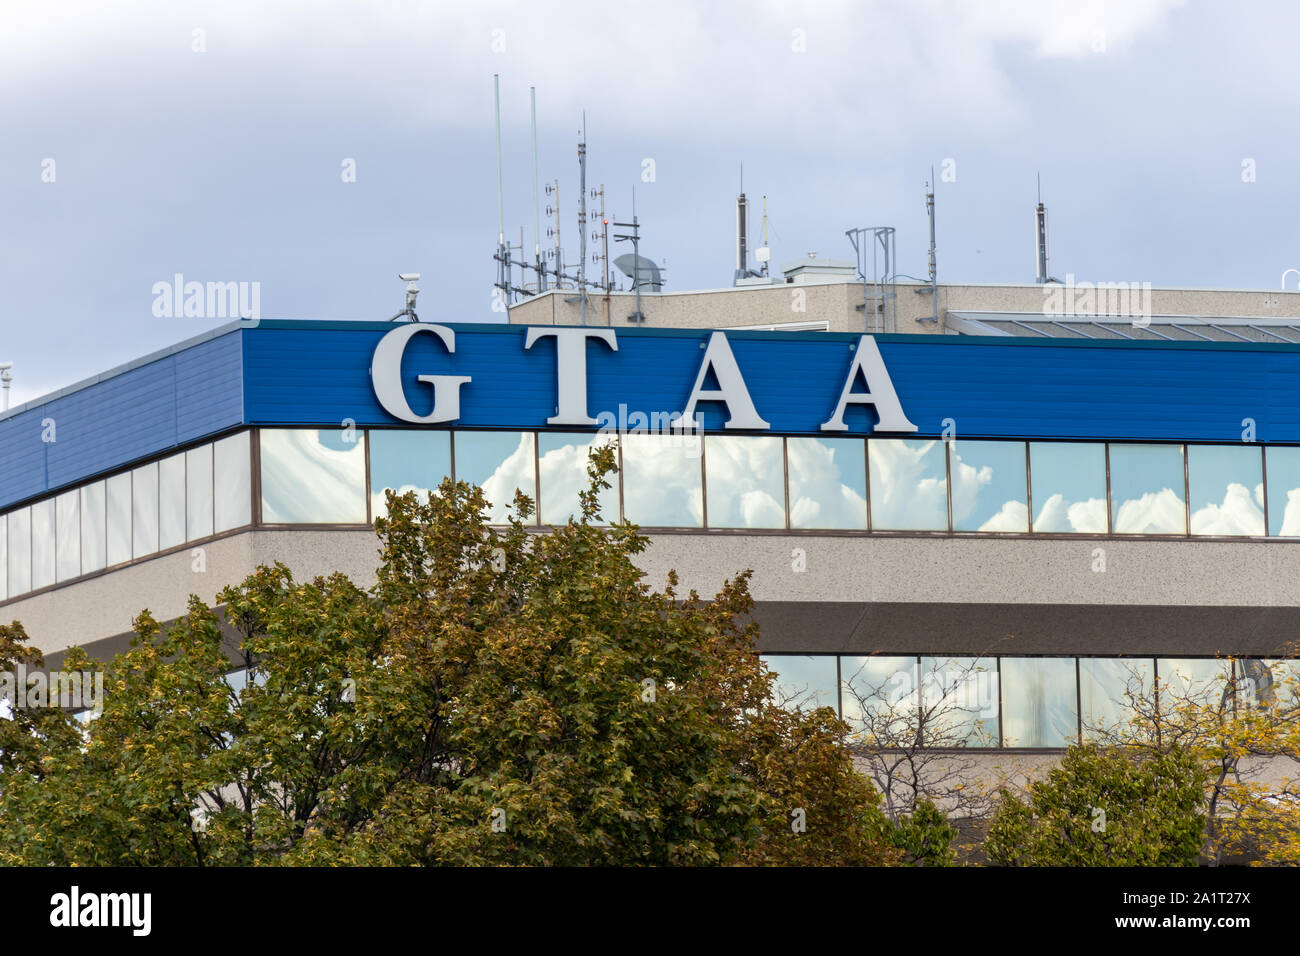 GTAA (Greater Toronto Airports Authority) office building at Toronto Pearson Intl. Airport. Stock Photo